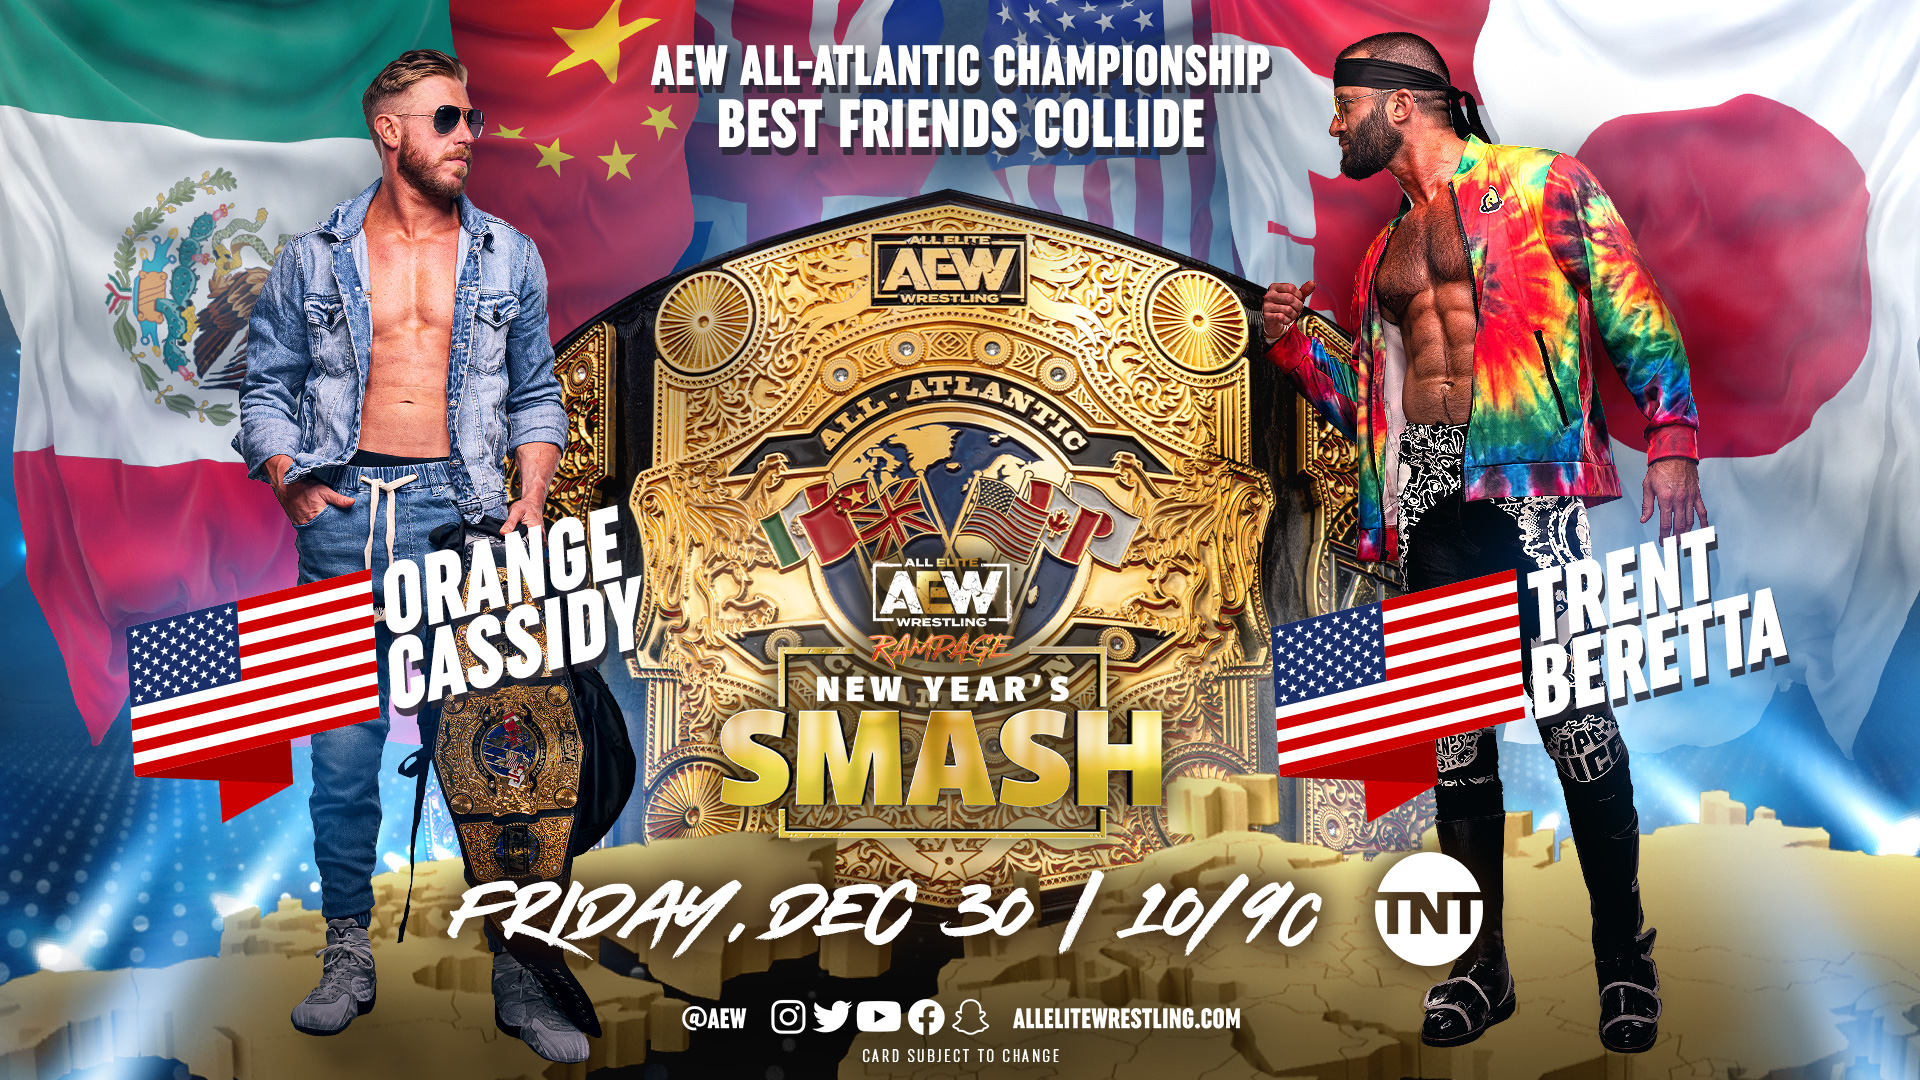 Wwe Eve Porn - AEW Rampage: New Year's Smash 2022 Results